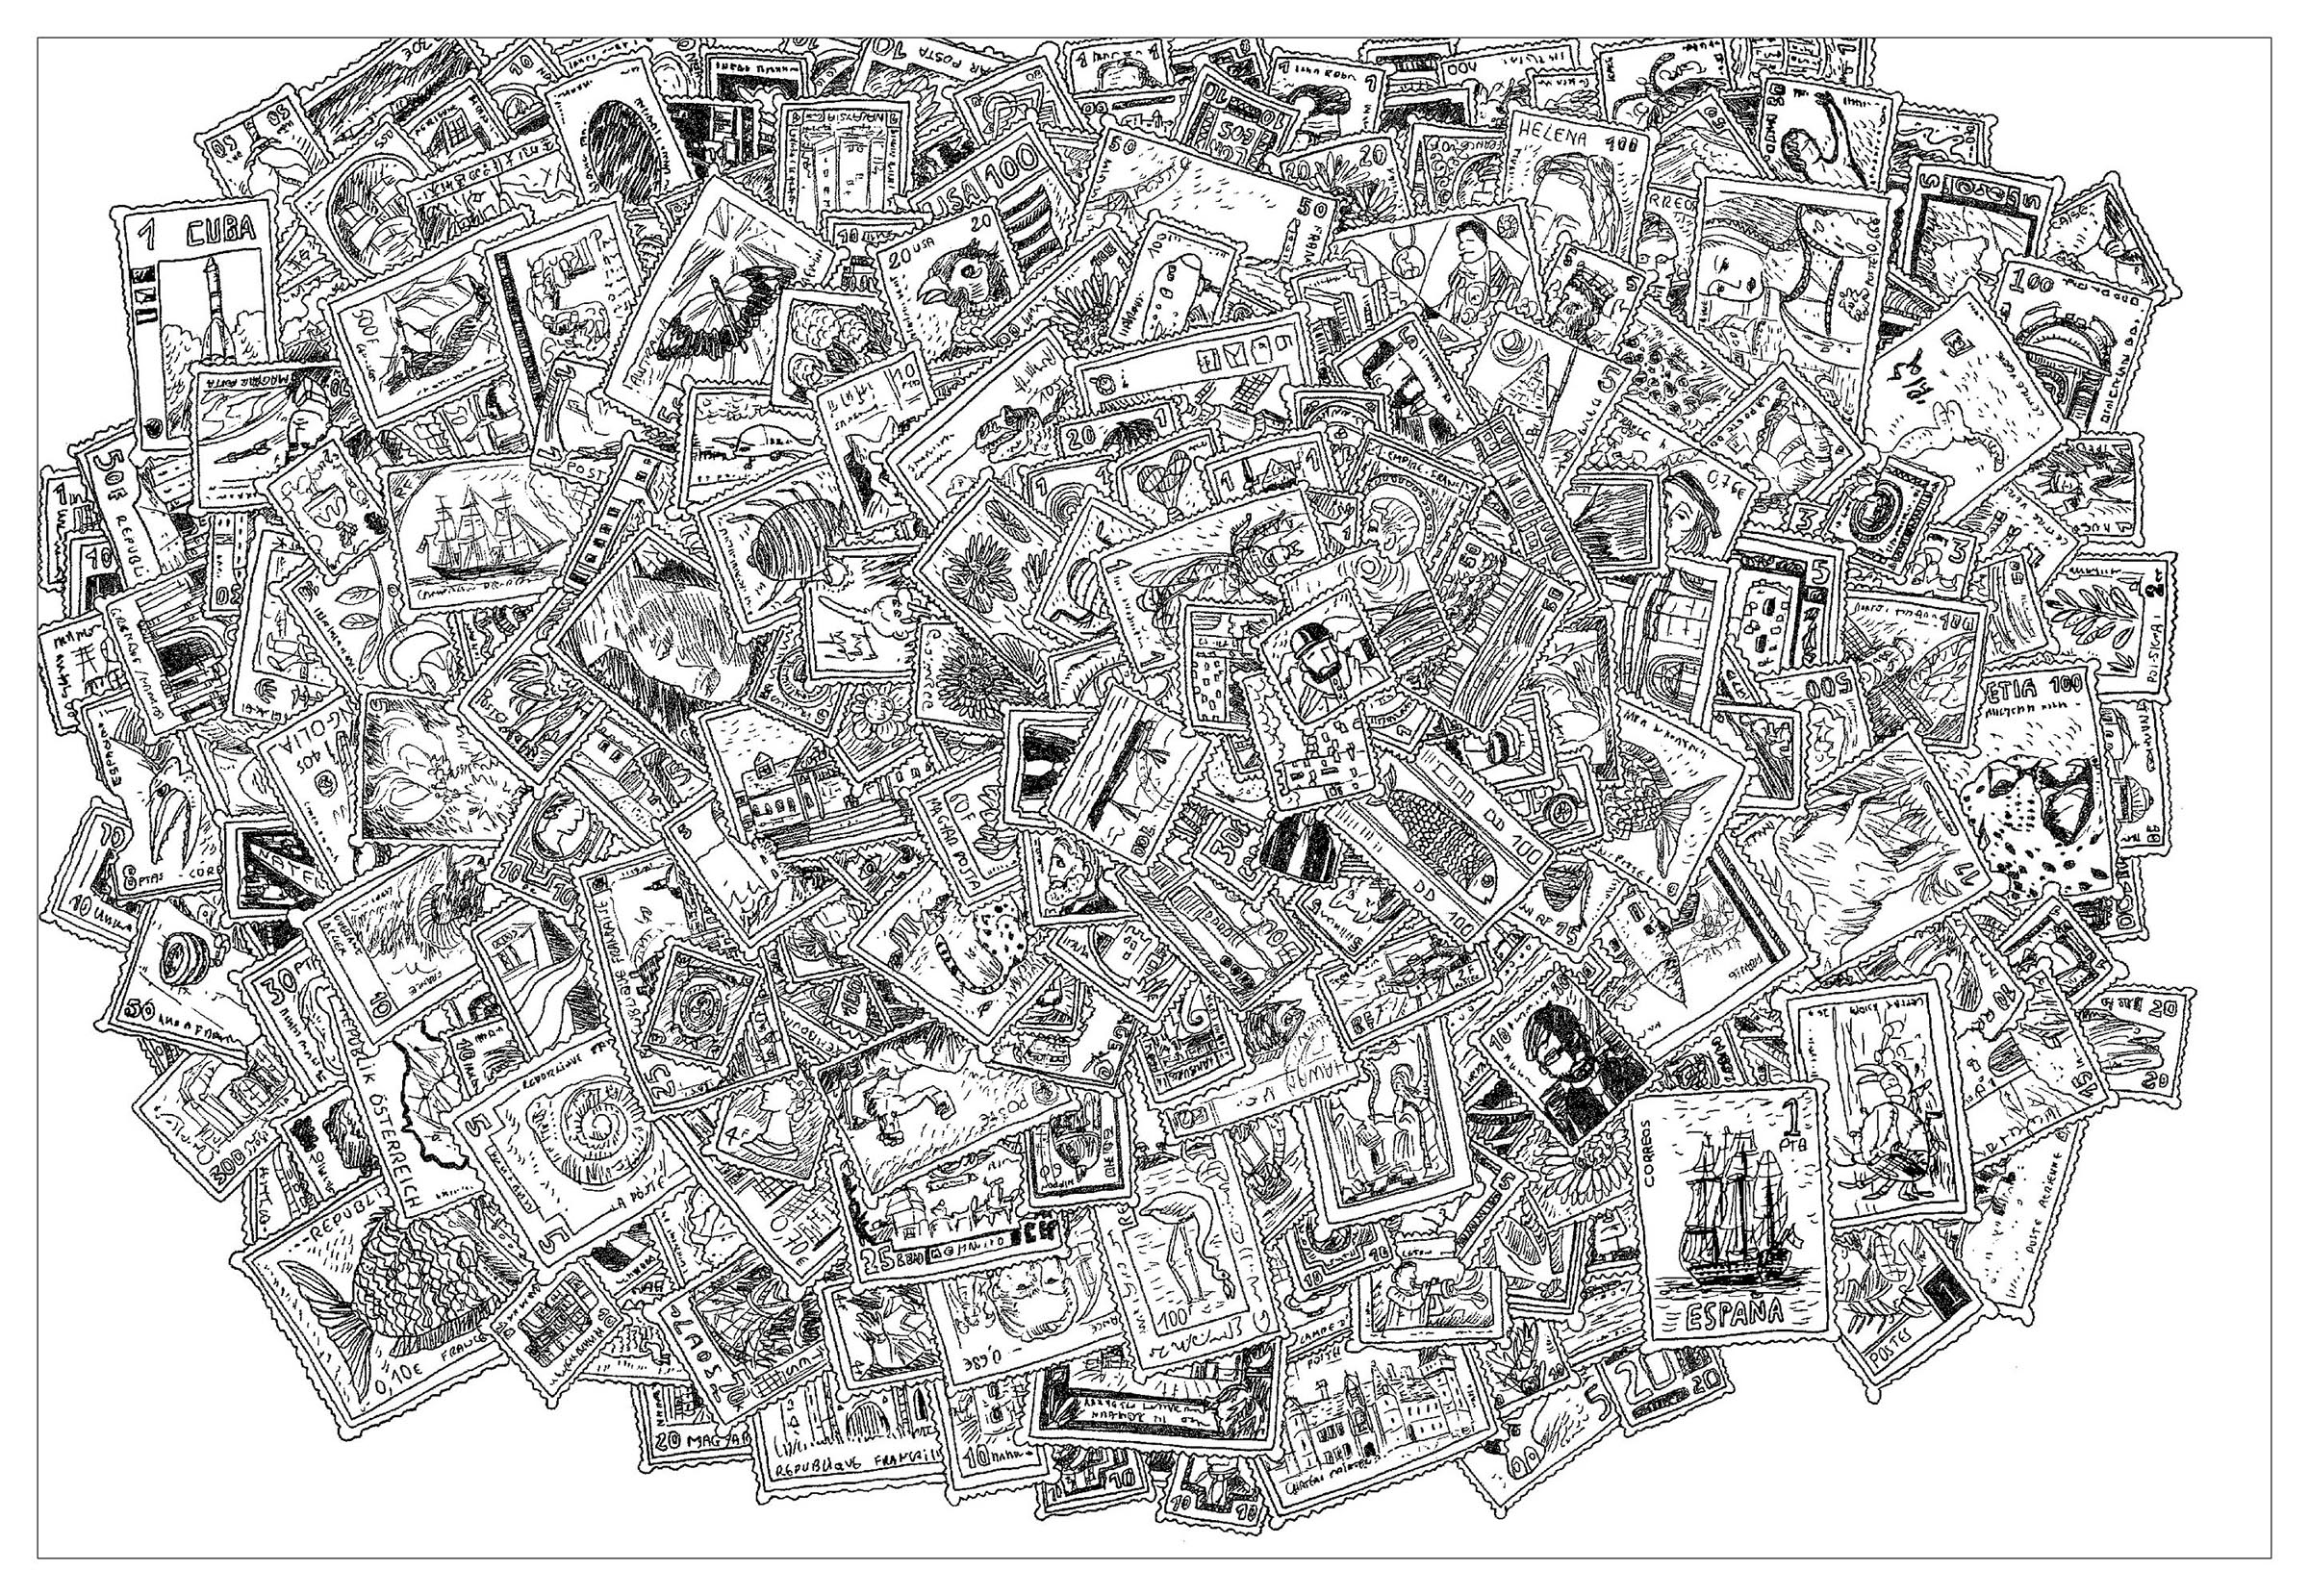 'Stamps', a complex coloring page, 'Where is Waldo ?' style